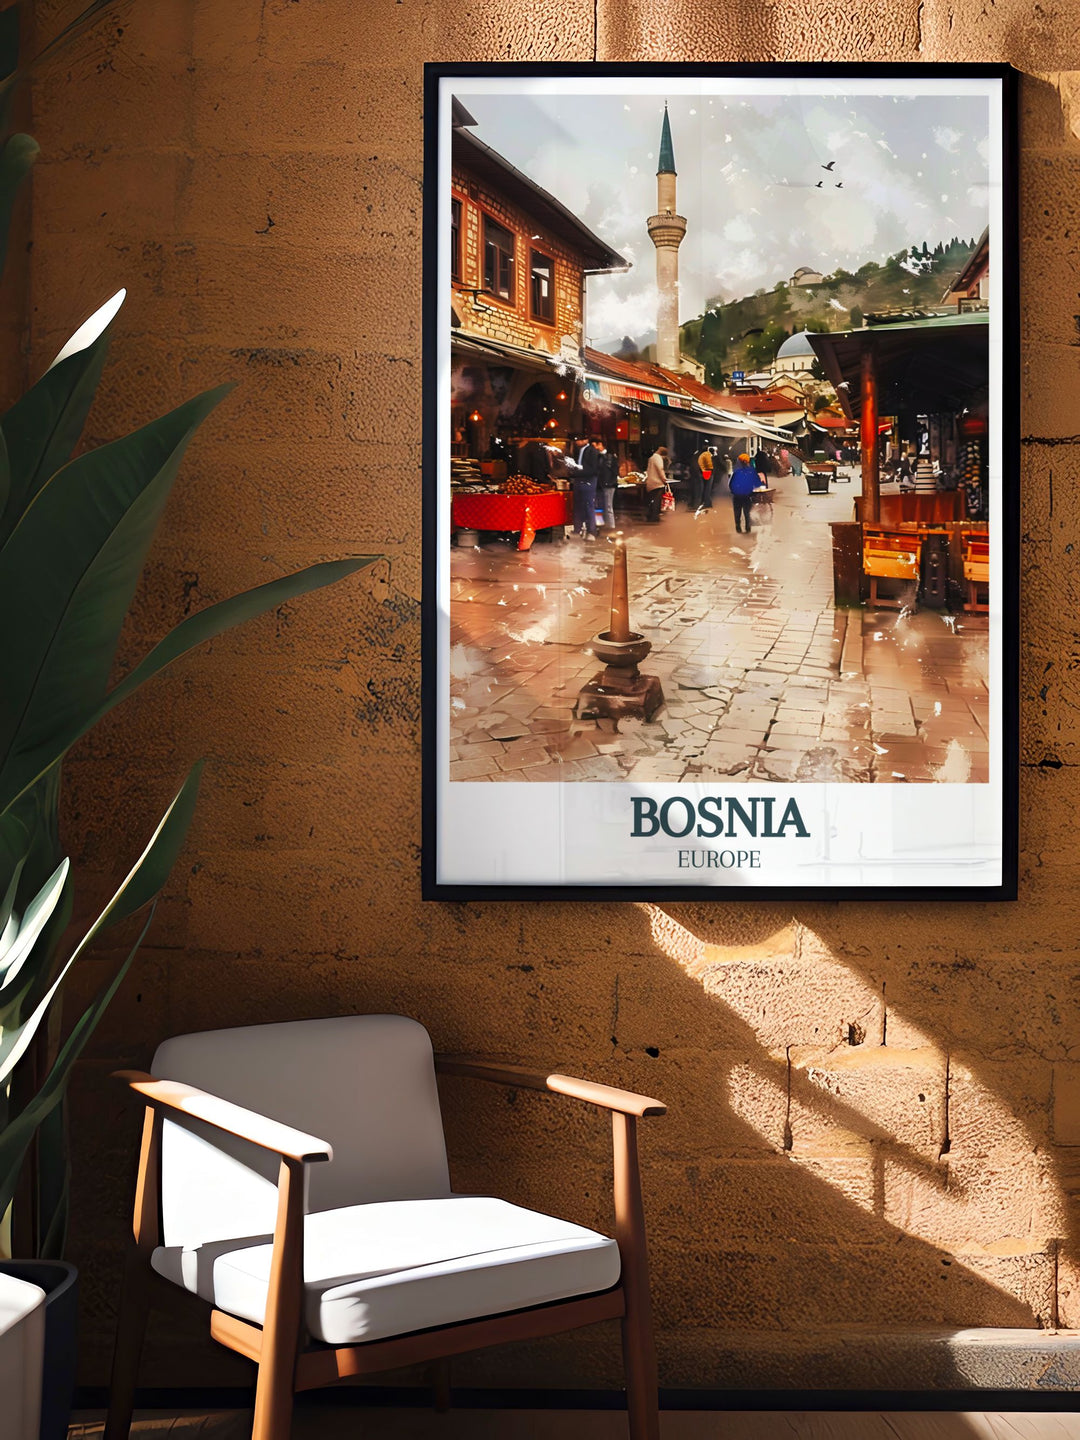 Discover the charm of Bascarsija, the Old Bazaar, Gazi Husrev beg Mosque with this exquisite Bosnia art print. Perfect for anniversary gifts, birthday gifts, or Christmas gifts, this Bosnia painting is a meaningful and elegant addition to any space.